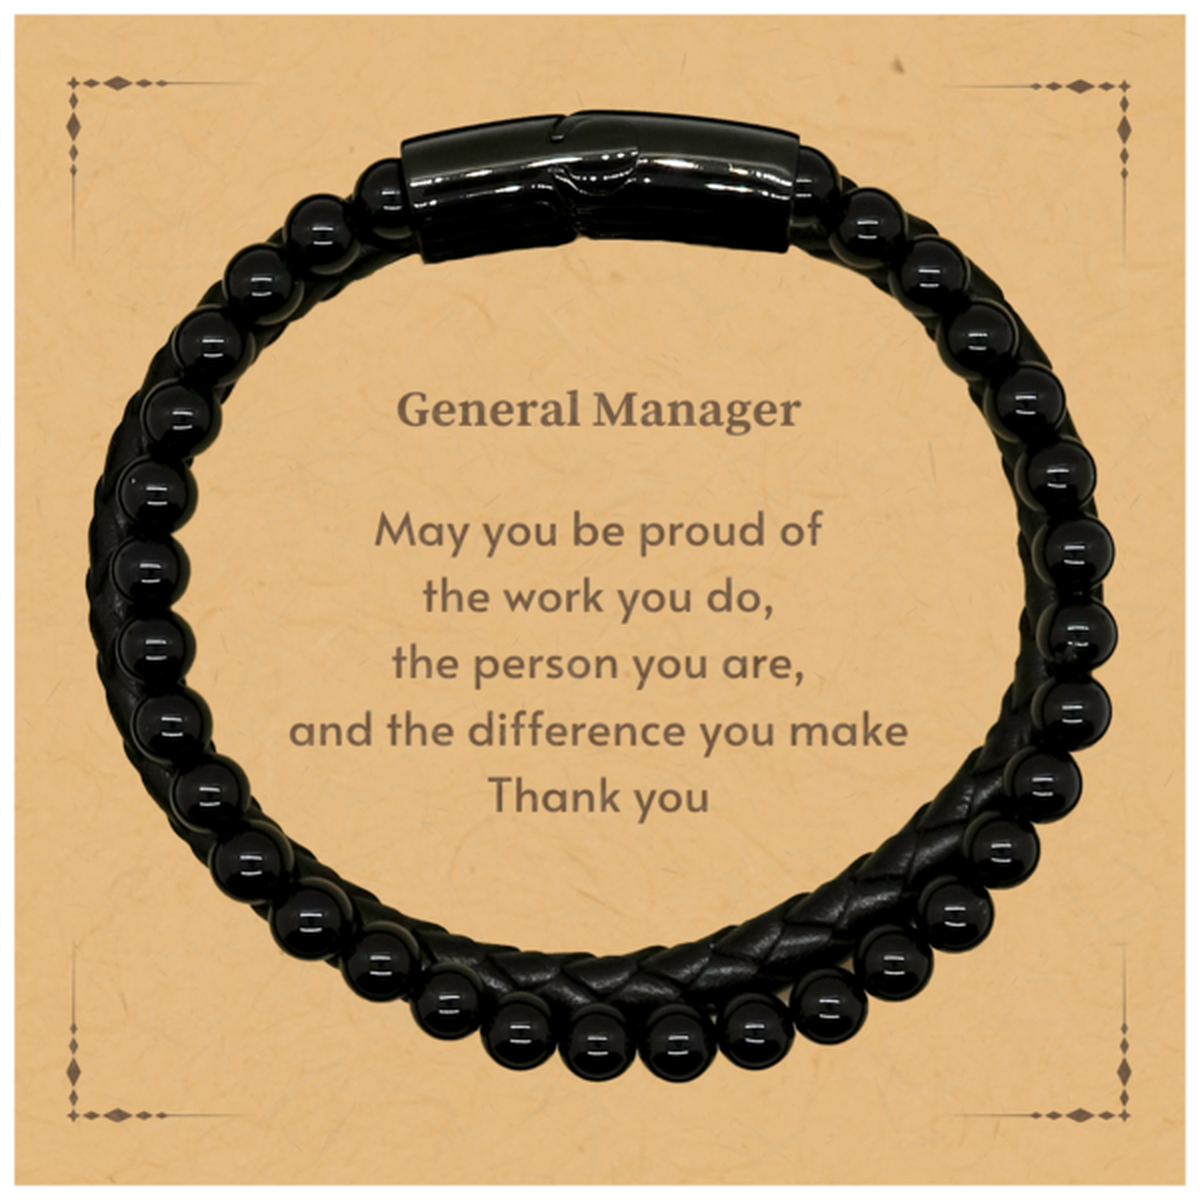 Heartwarming Stone Leather Bracelets Retirement Coworkers Gifts for General Manager, General Manager May You be proud of the work you do, the person you are Gifts for Boss Men Women Friends